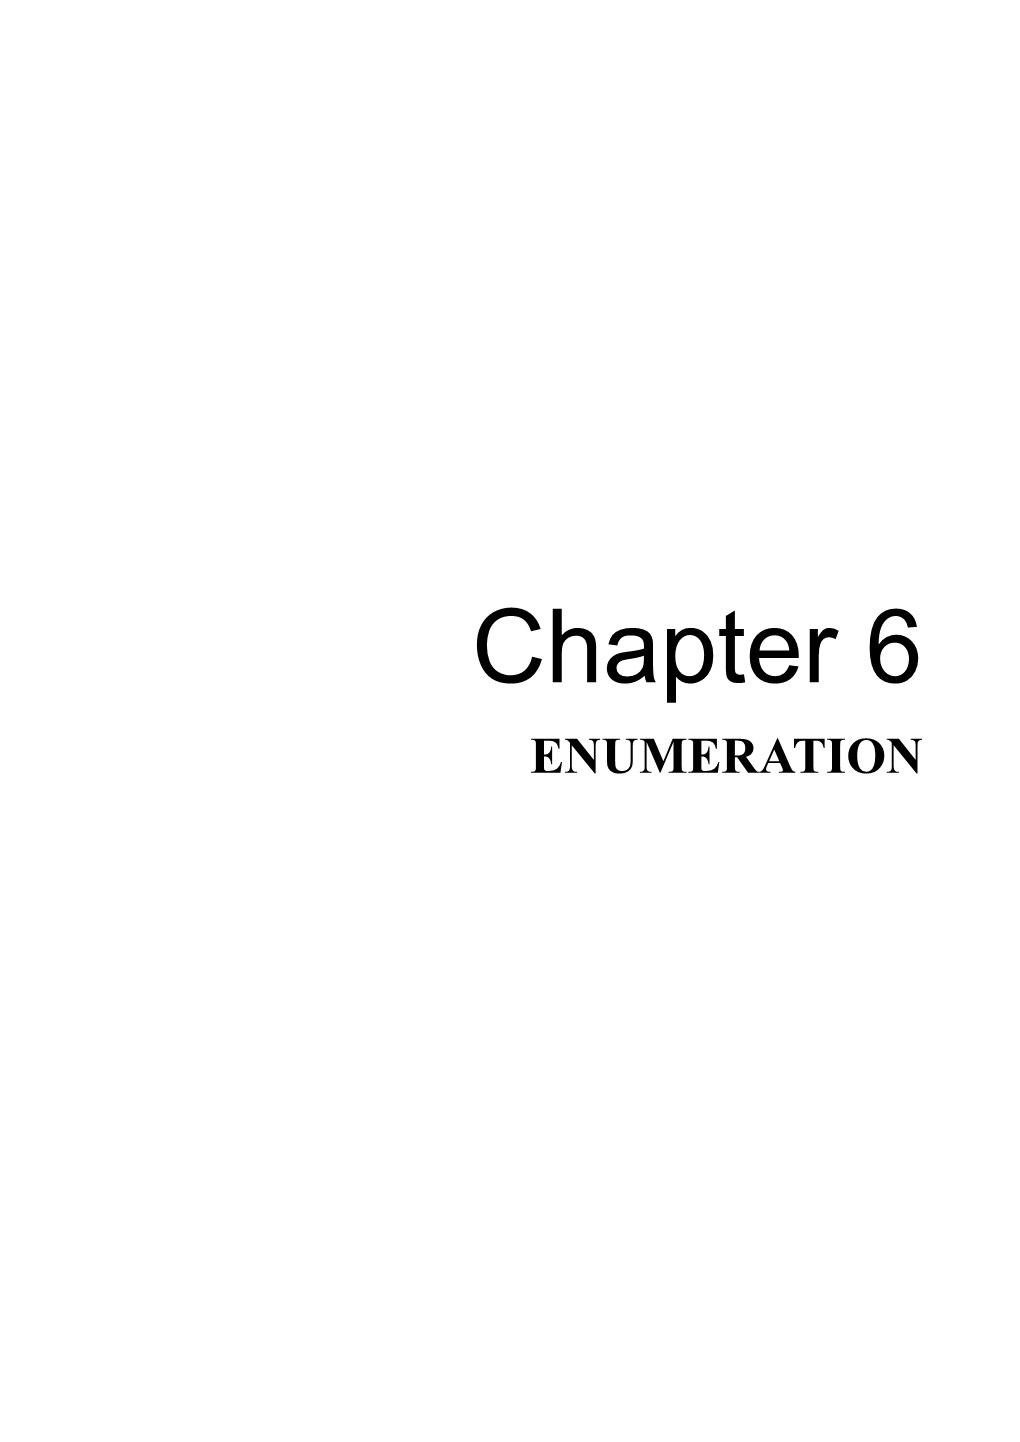 Chapter 6 ENUMERATION